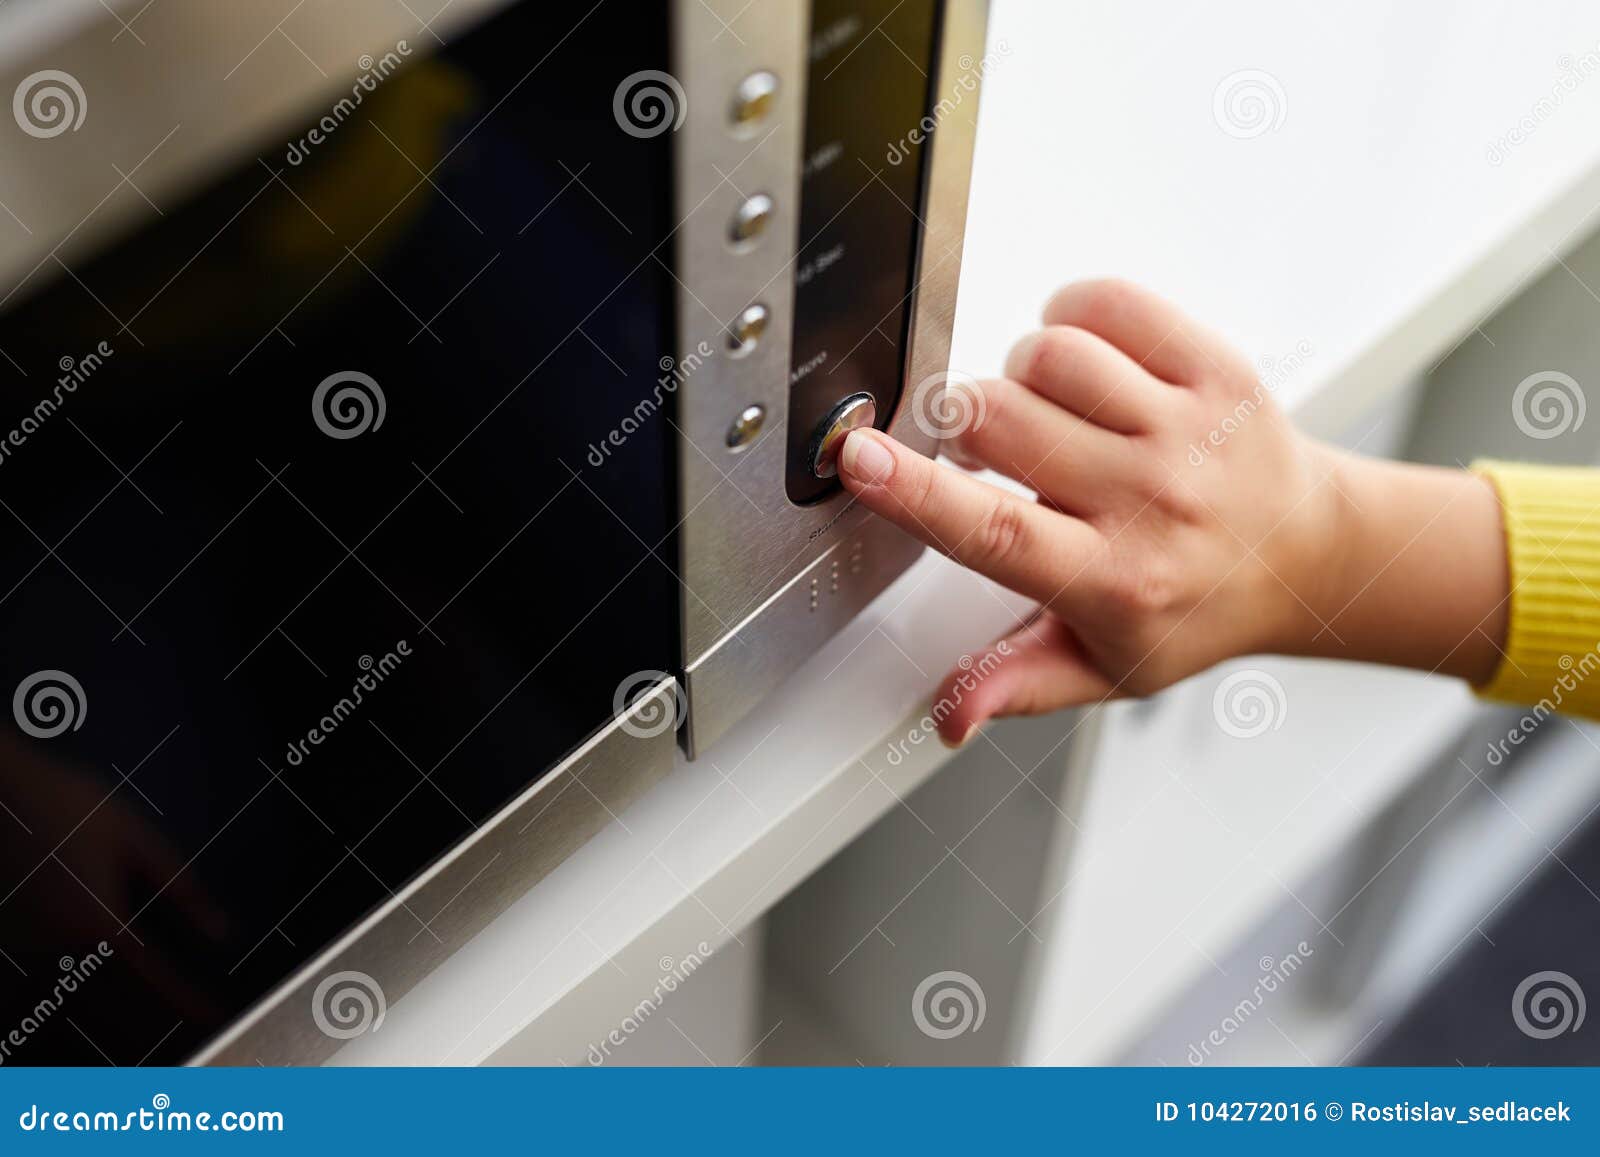 https://thumbs.dreamstime.com/z/woman-uses-microwave-oven-office-woman-uses-microwave-oven-104272016.jpg